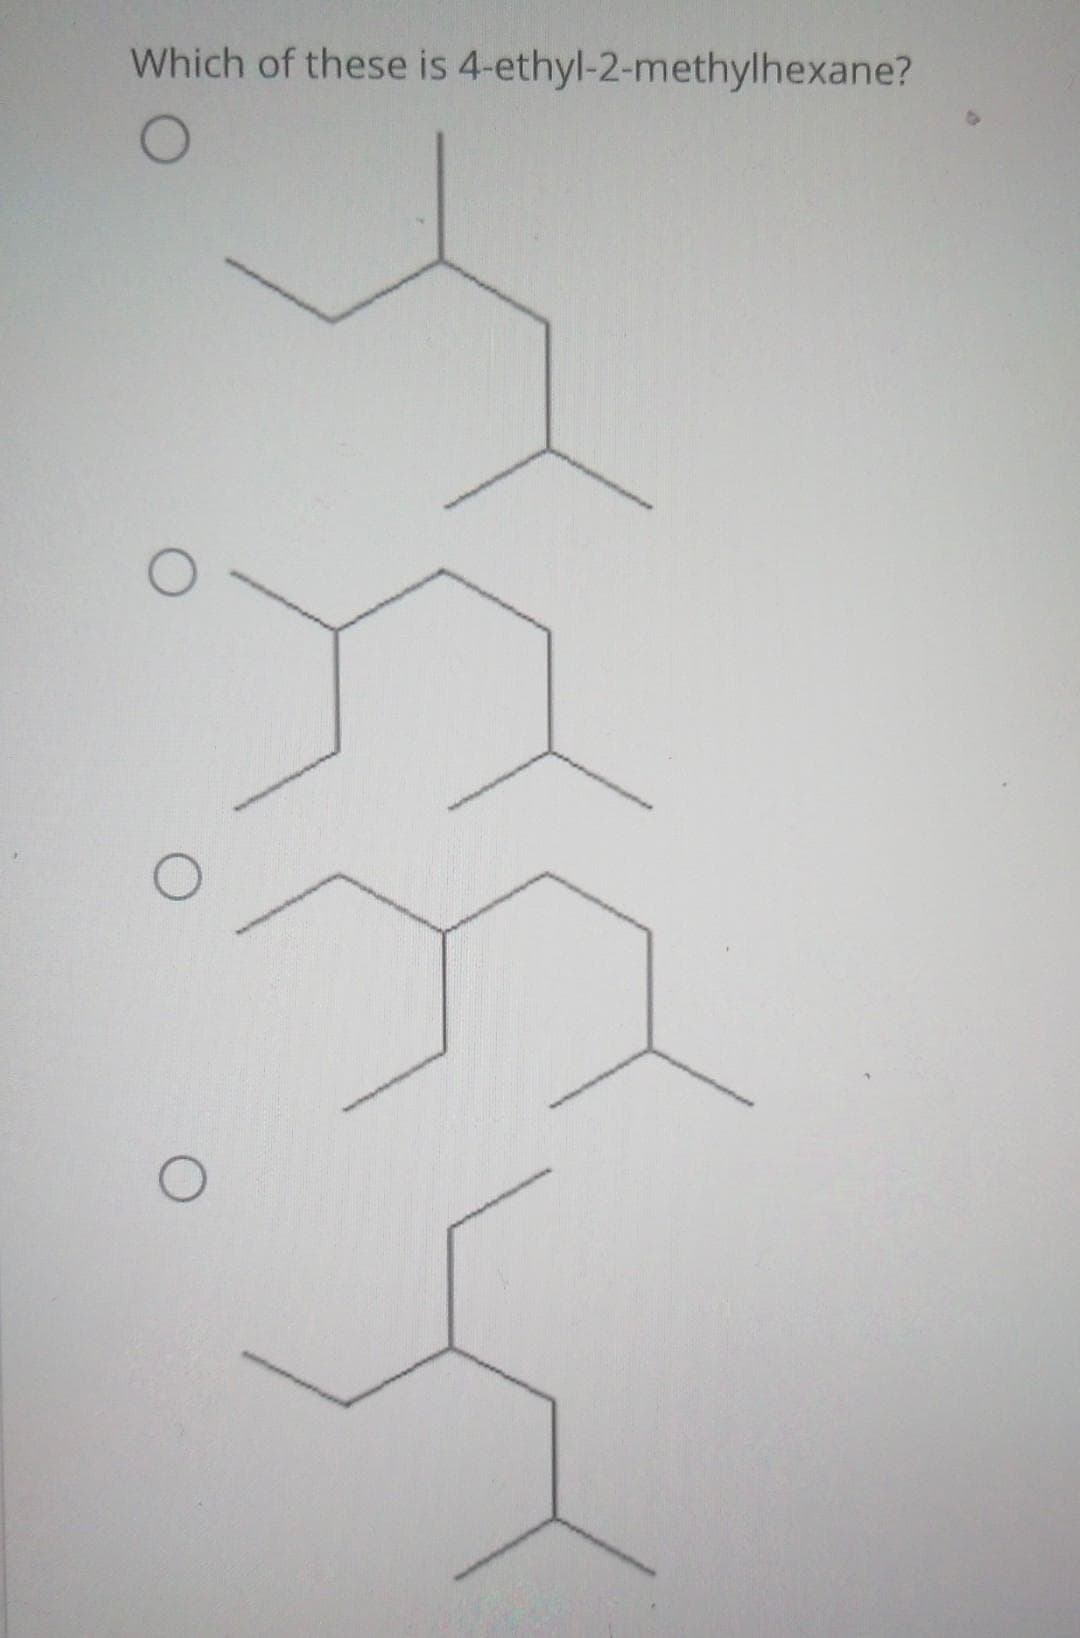 Which of these is 4-ethyl-2-methylhexane?
